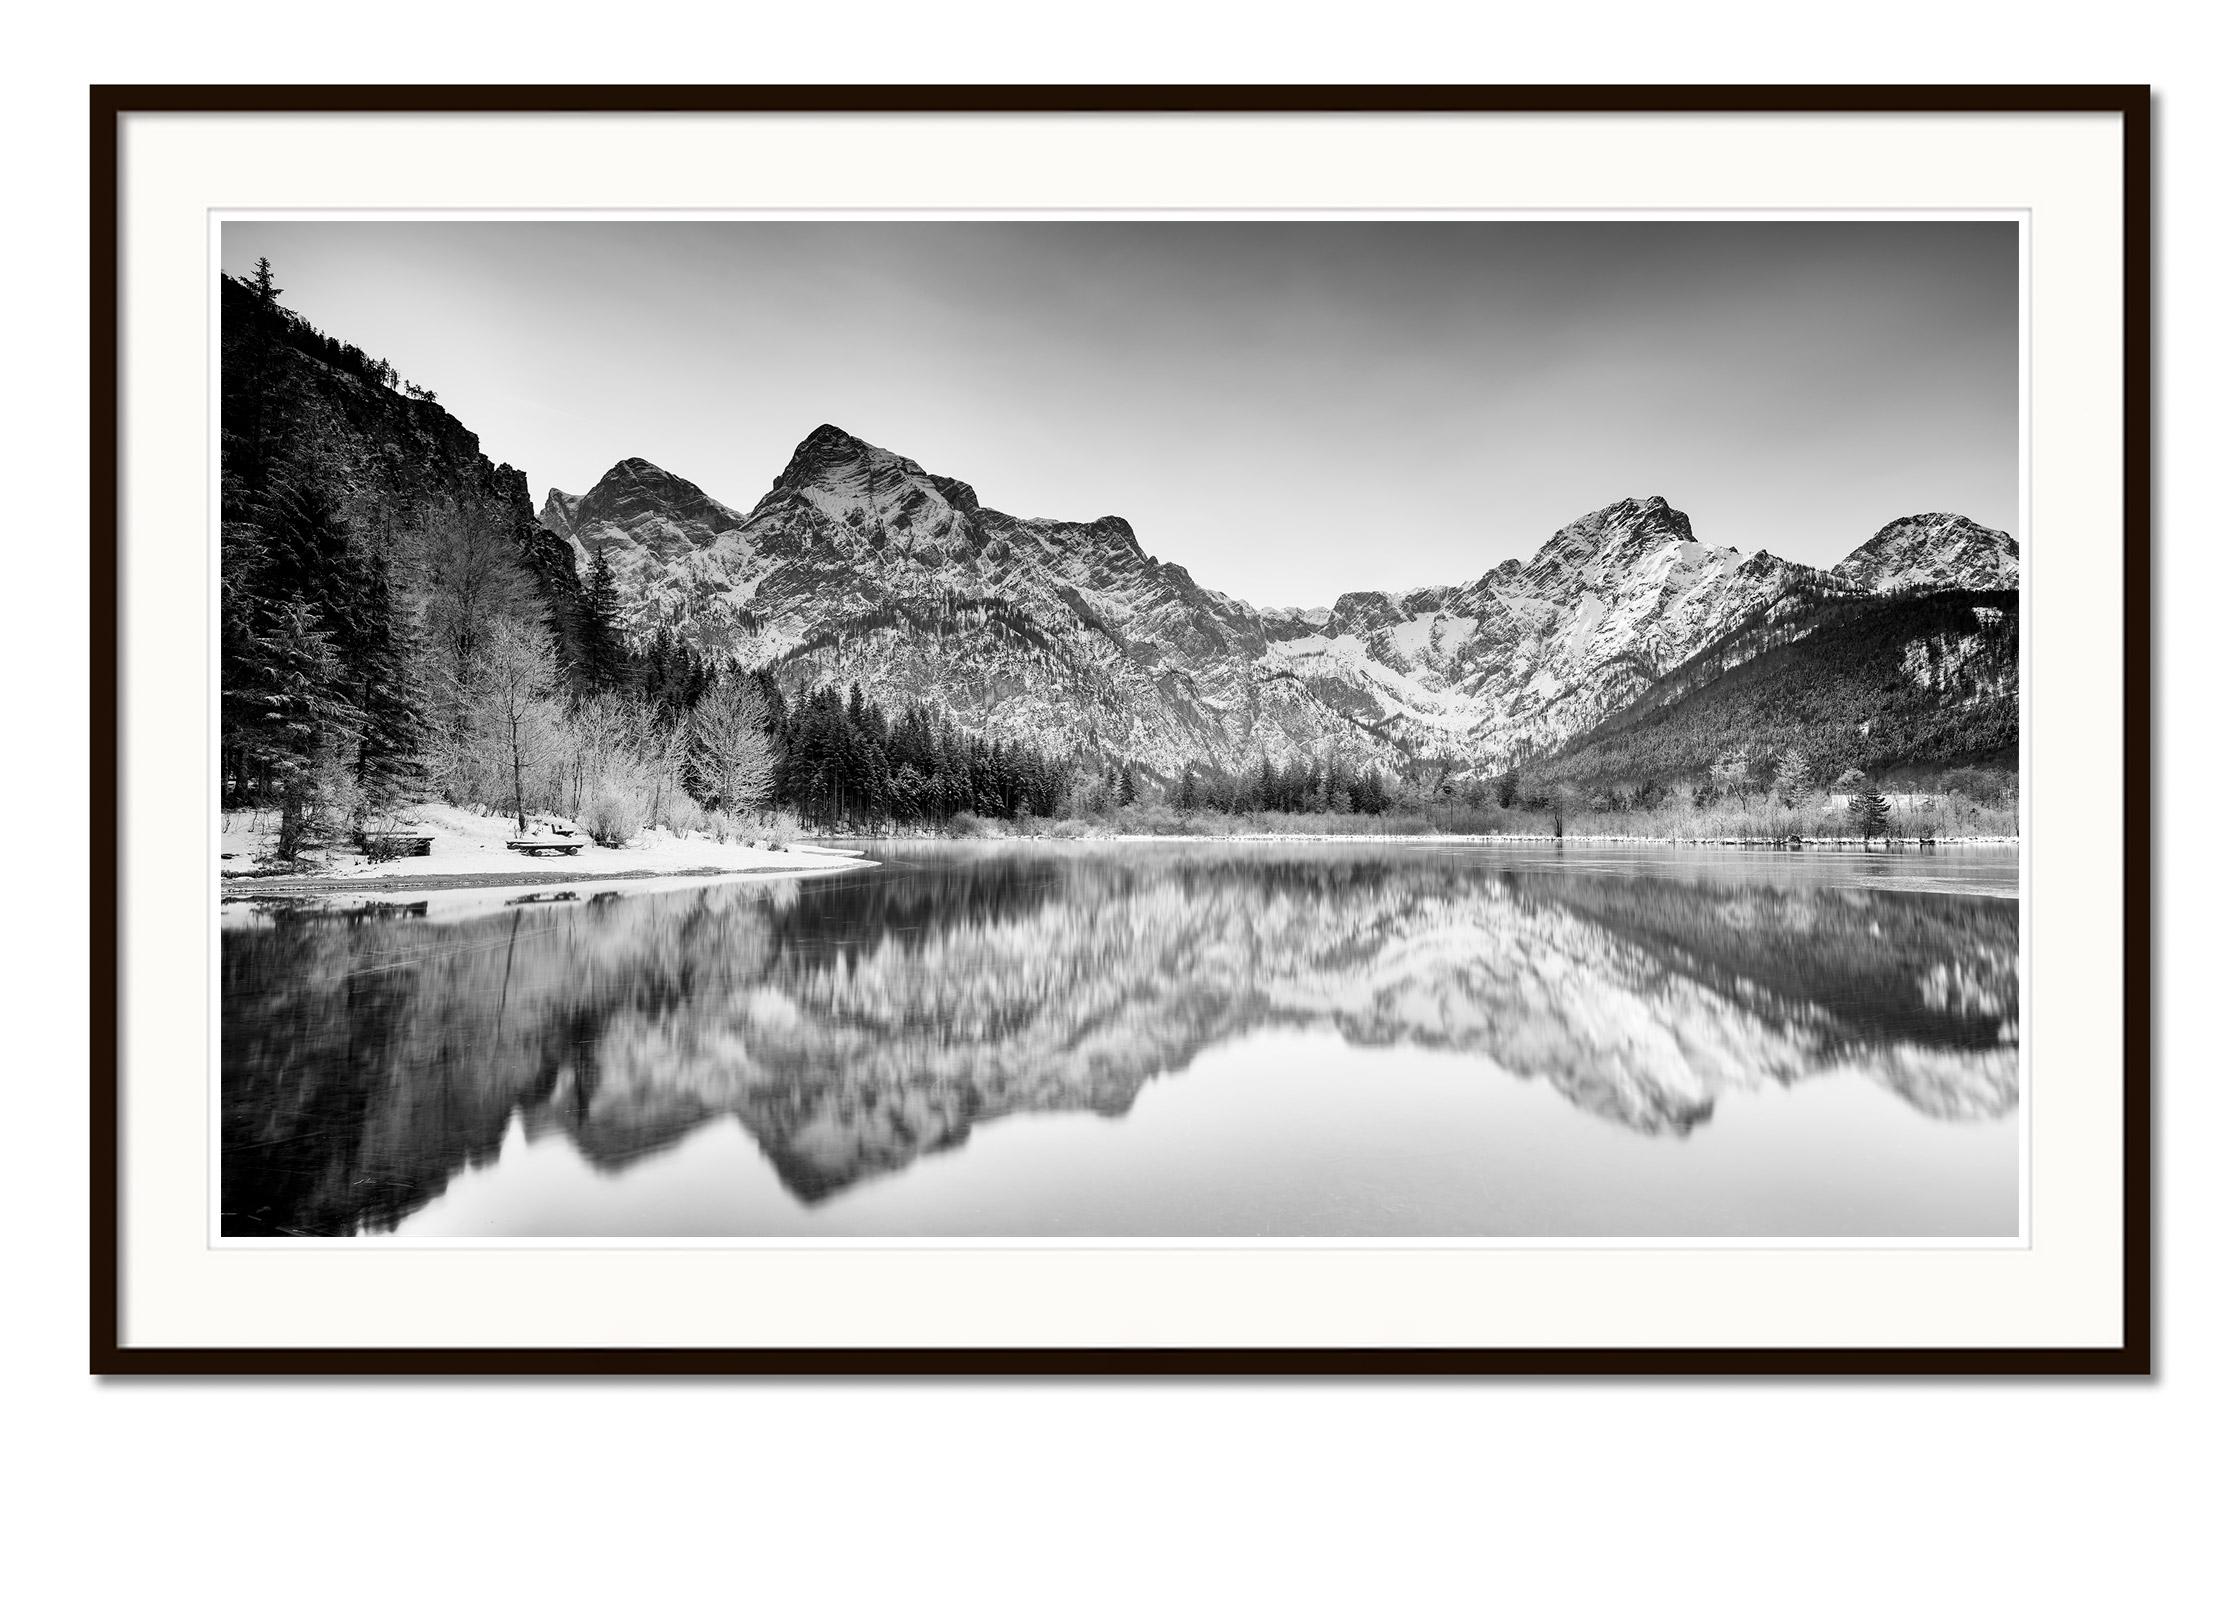 Black and white fine art panorama long exposure landscape photography. Lake side winter panorama with mountains, lake and beautiful reflections in the water, Almsee, Austria. Archival pigment ink print, edition of 8. Signed, titled, dated and